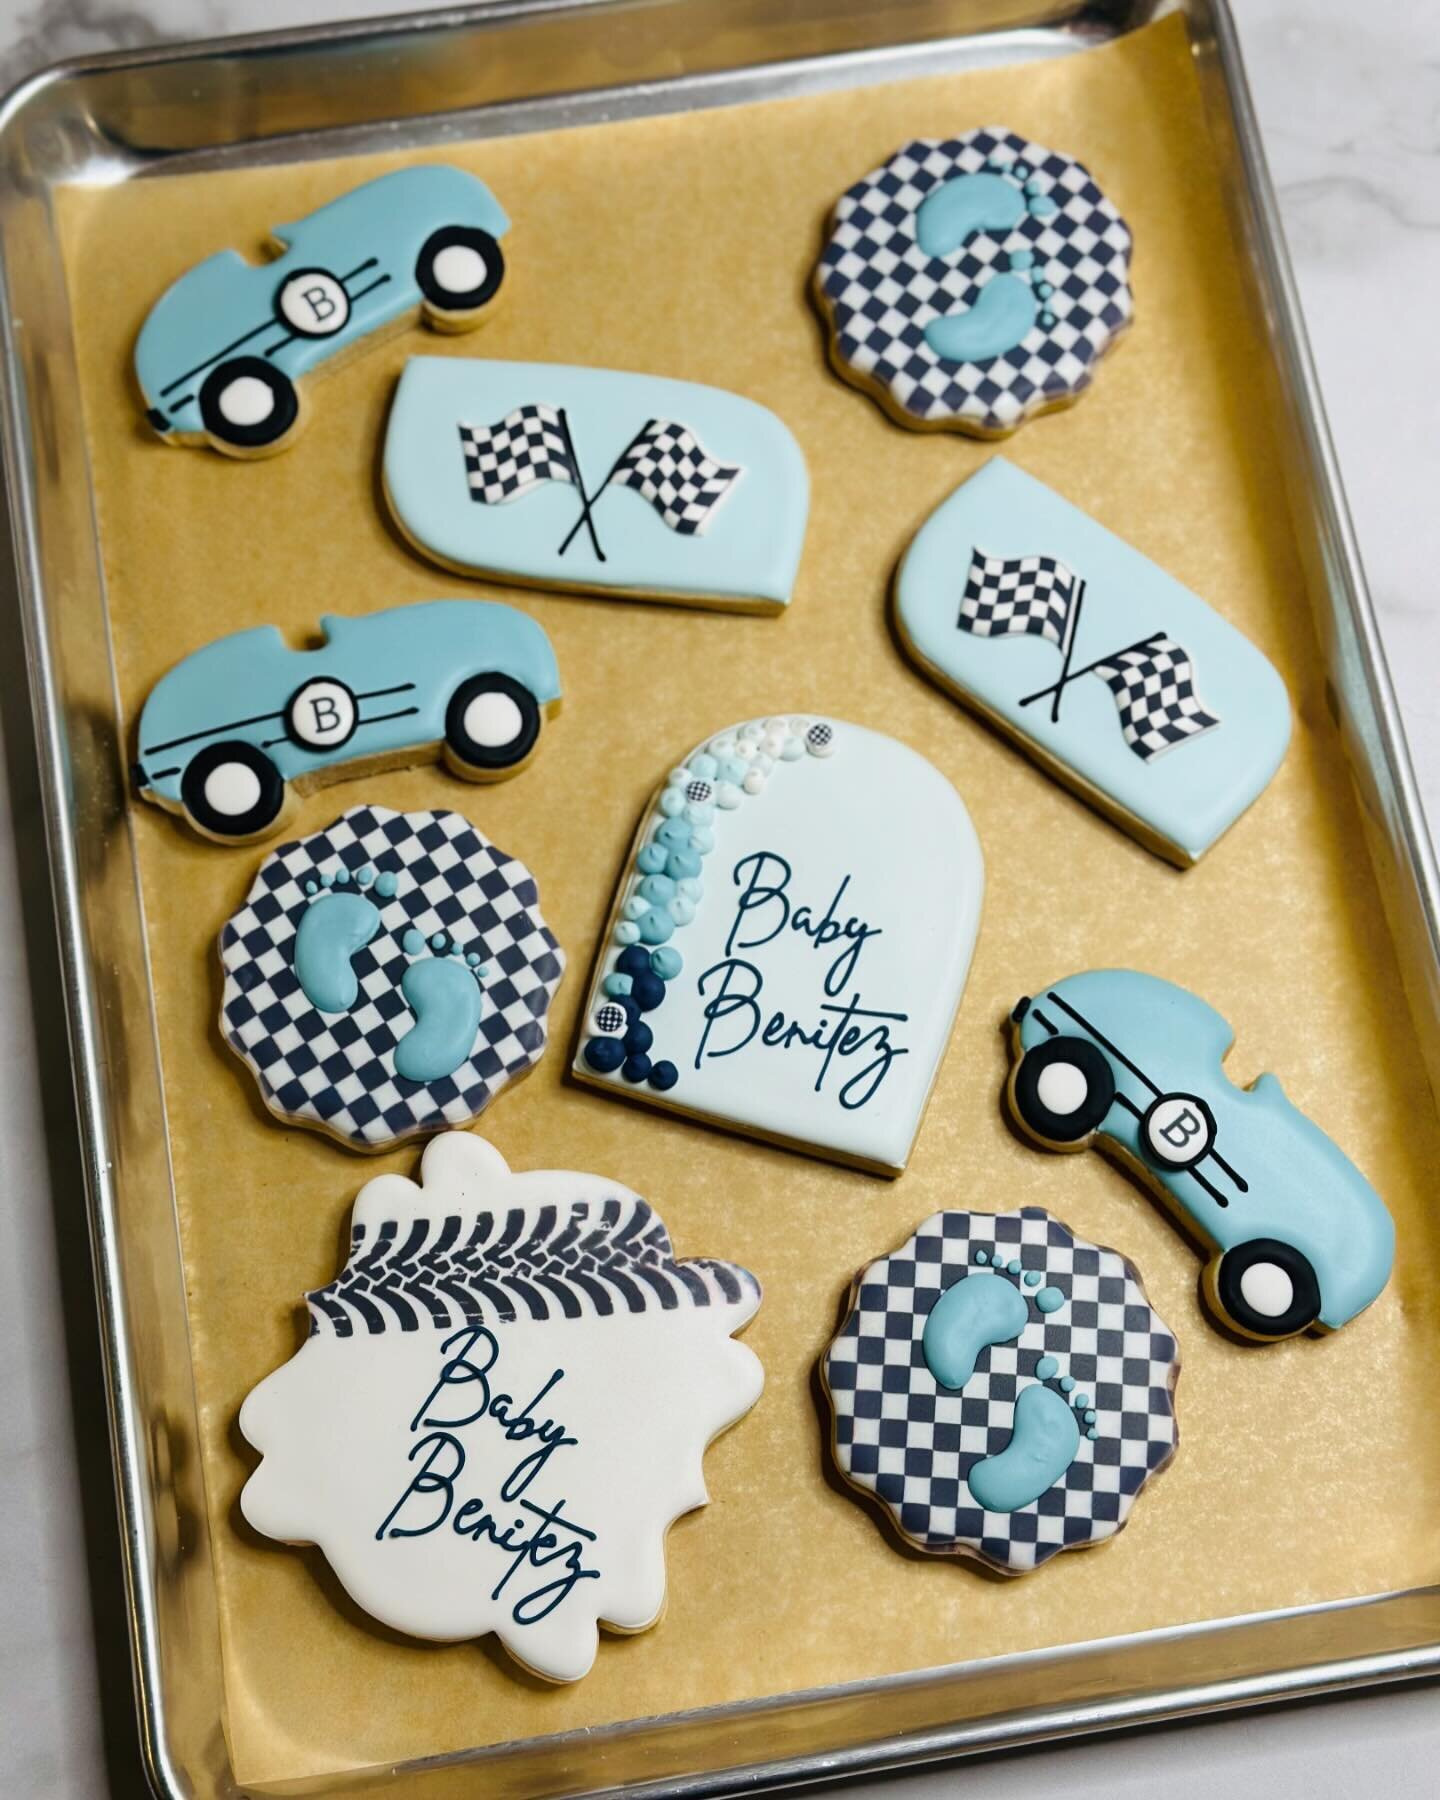 Revving up for the cutest baby shower ever with these race car themed cookies! 🏁🍼 From checkered flags to little race cars, every bite is a sweet celebration of the journey ahead. #RaceCarBabyShower #SweetStarts #BabyOnBoard #MomToBe #DessertTableG